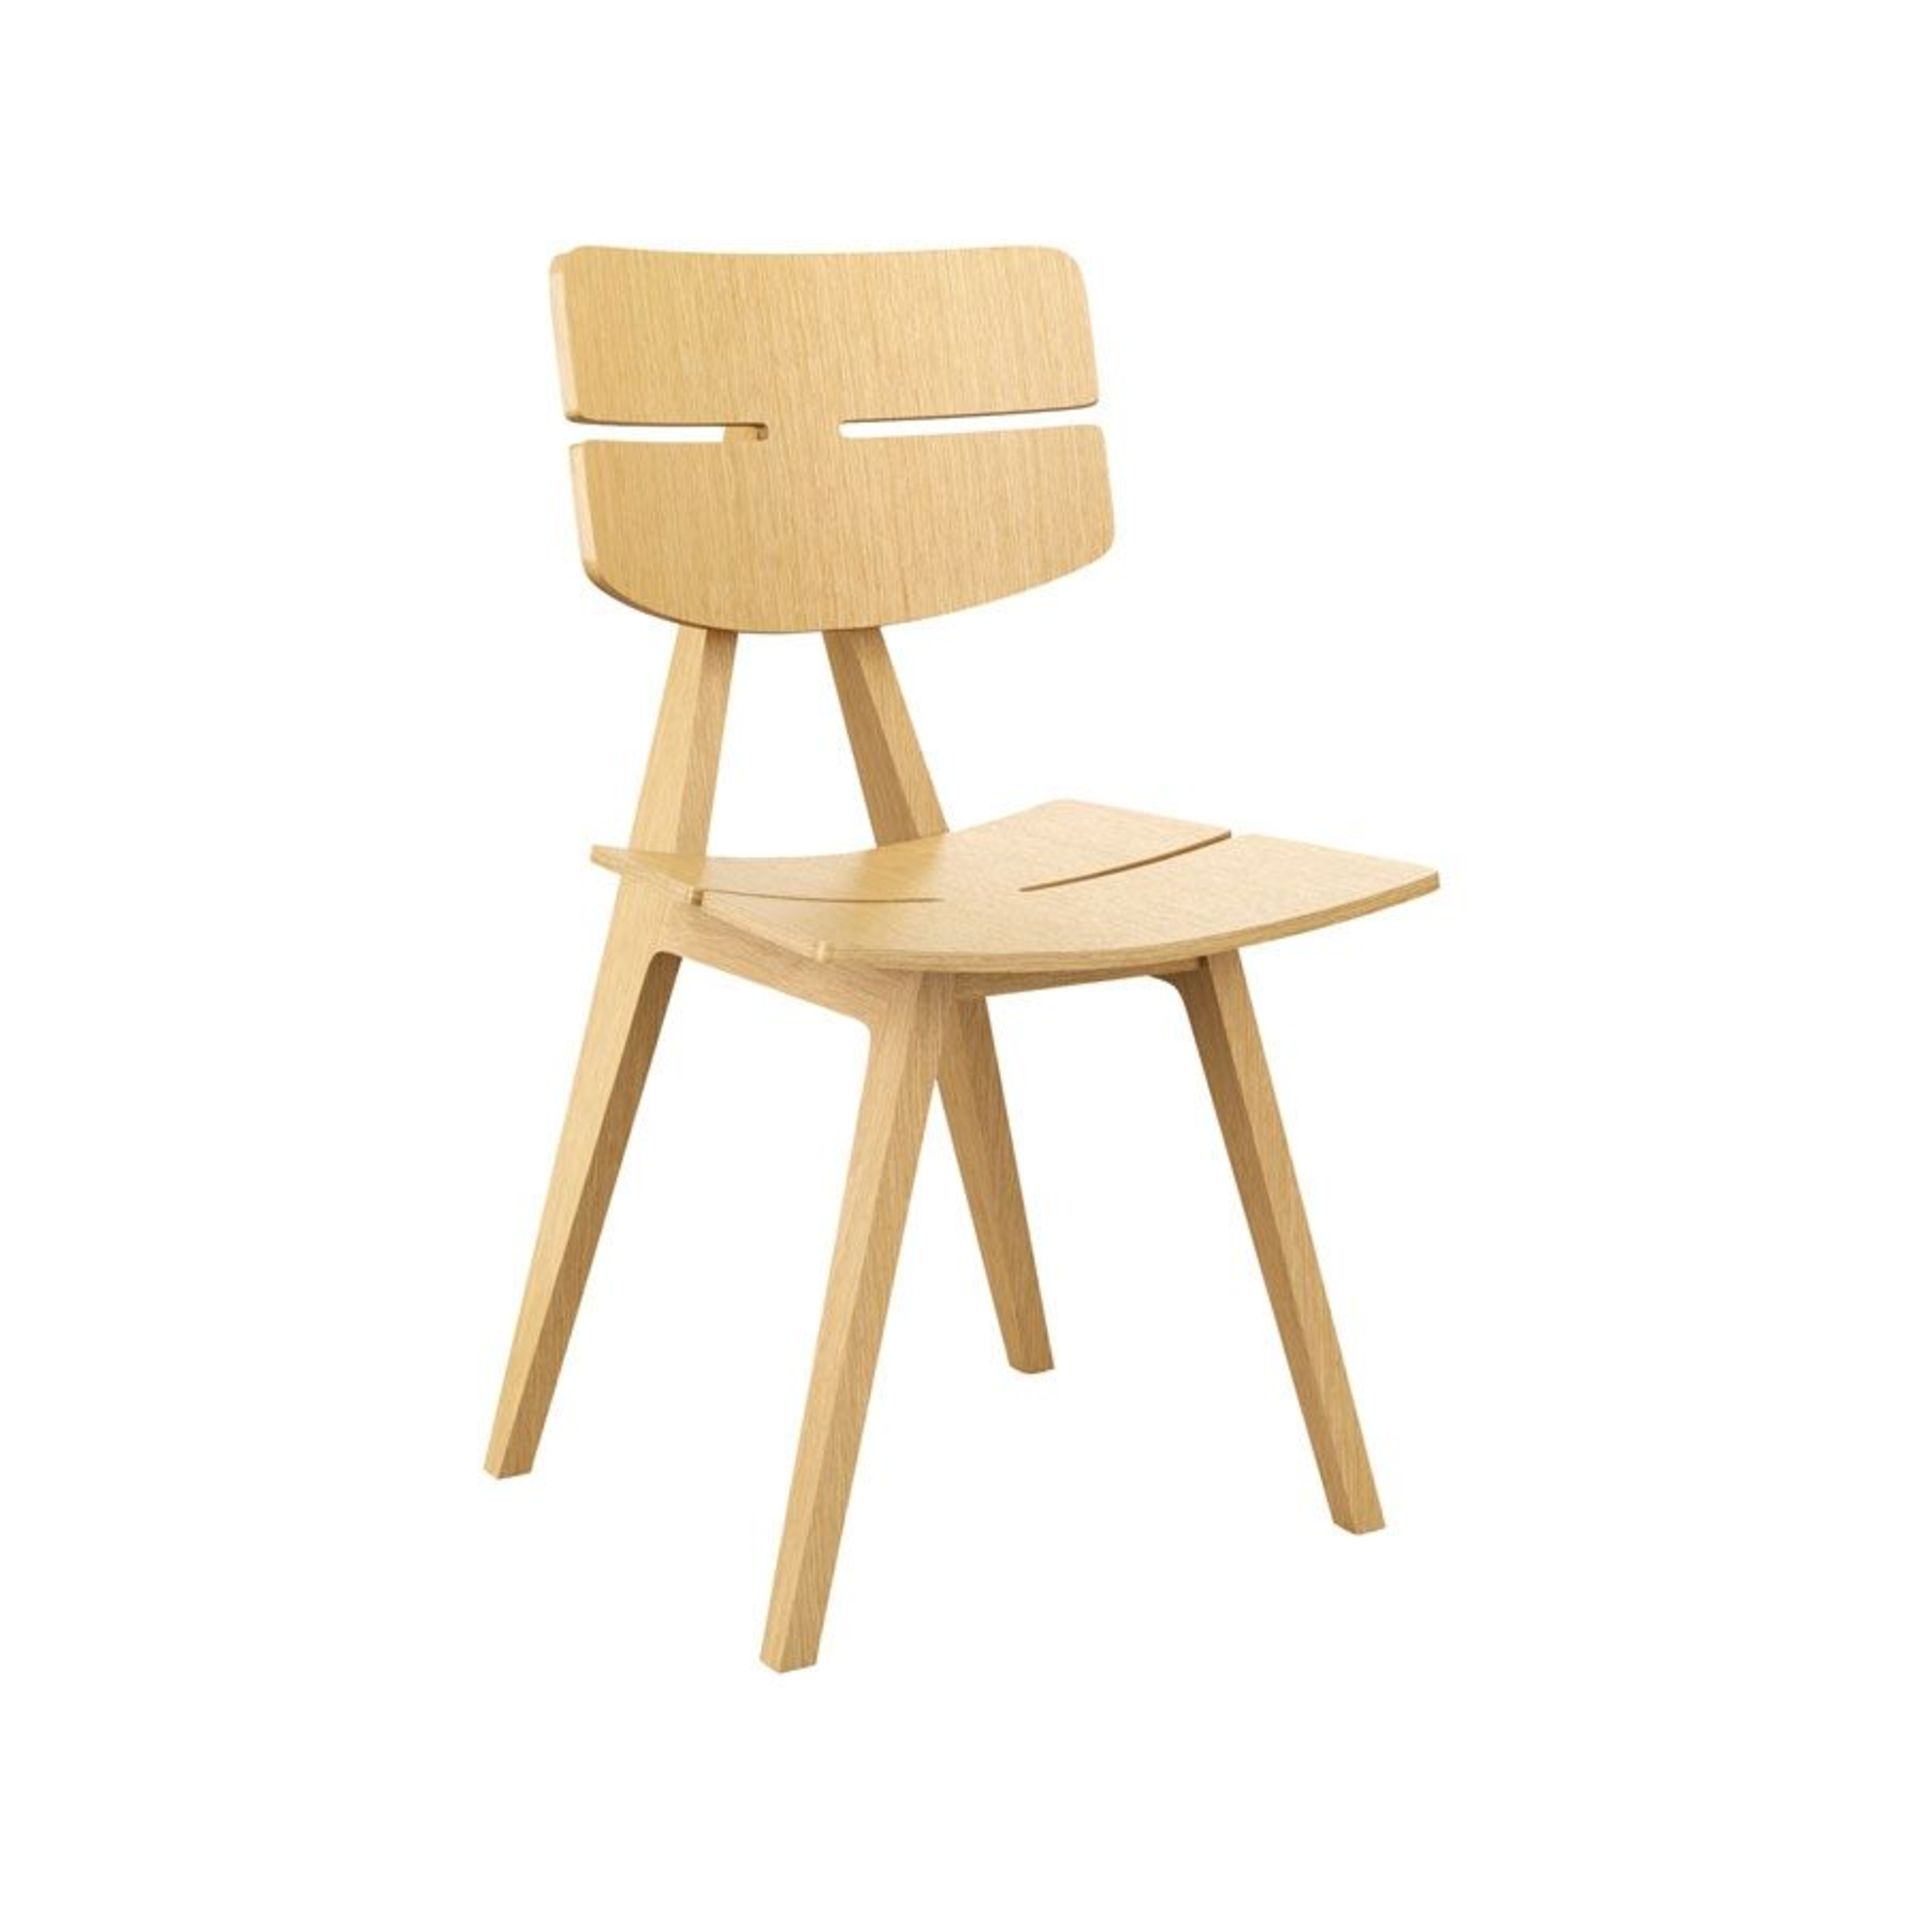 4 x Zest Solid Beech Dining Chairs - New Boxed Stock - RRP £456 - Solid Beech Frame With Curved